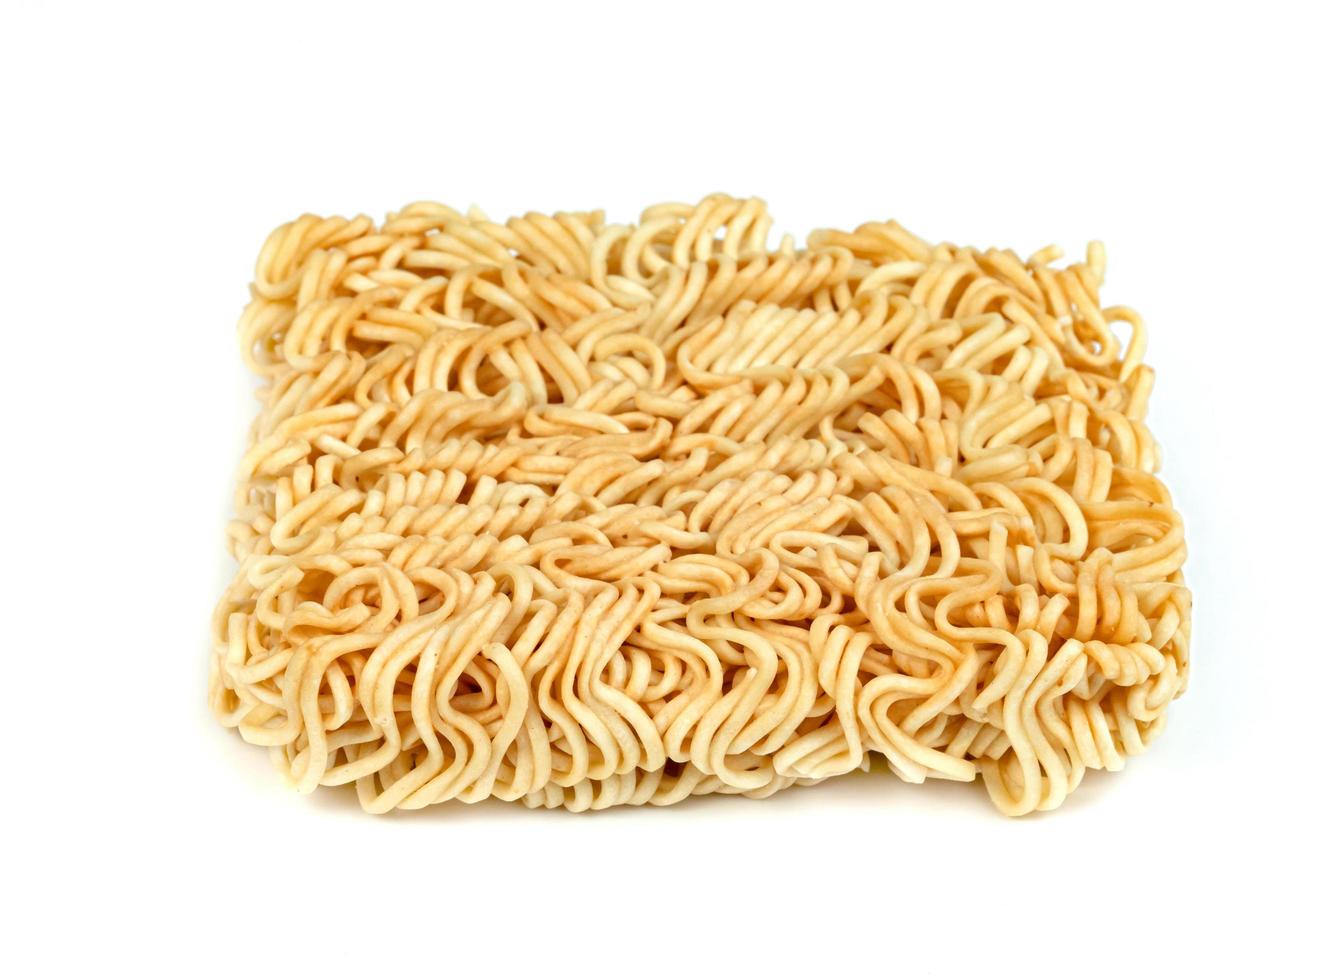 Instant noodles isolated on white background photo